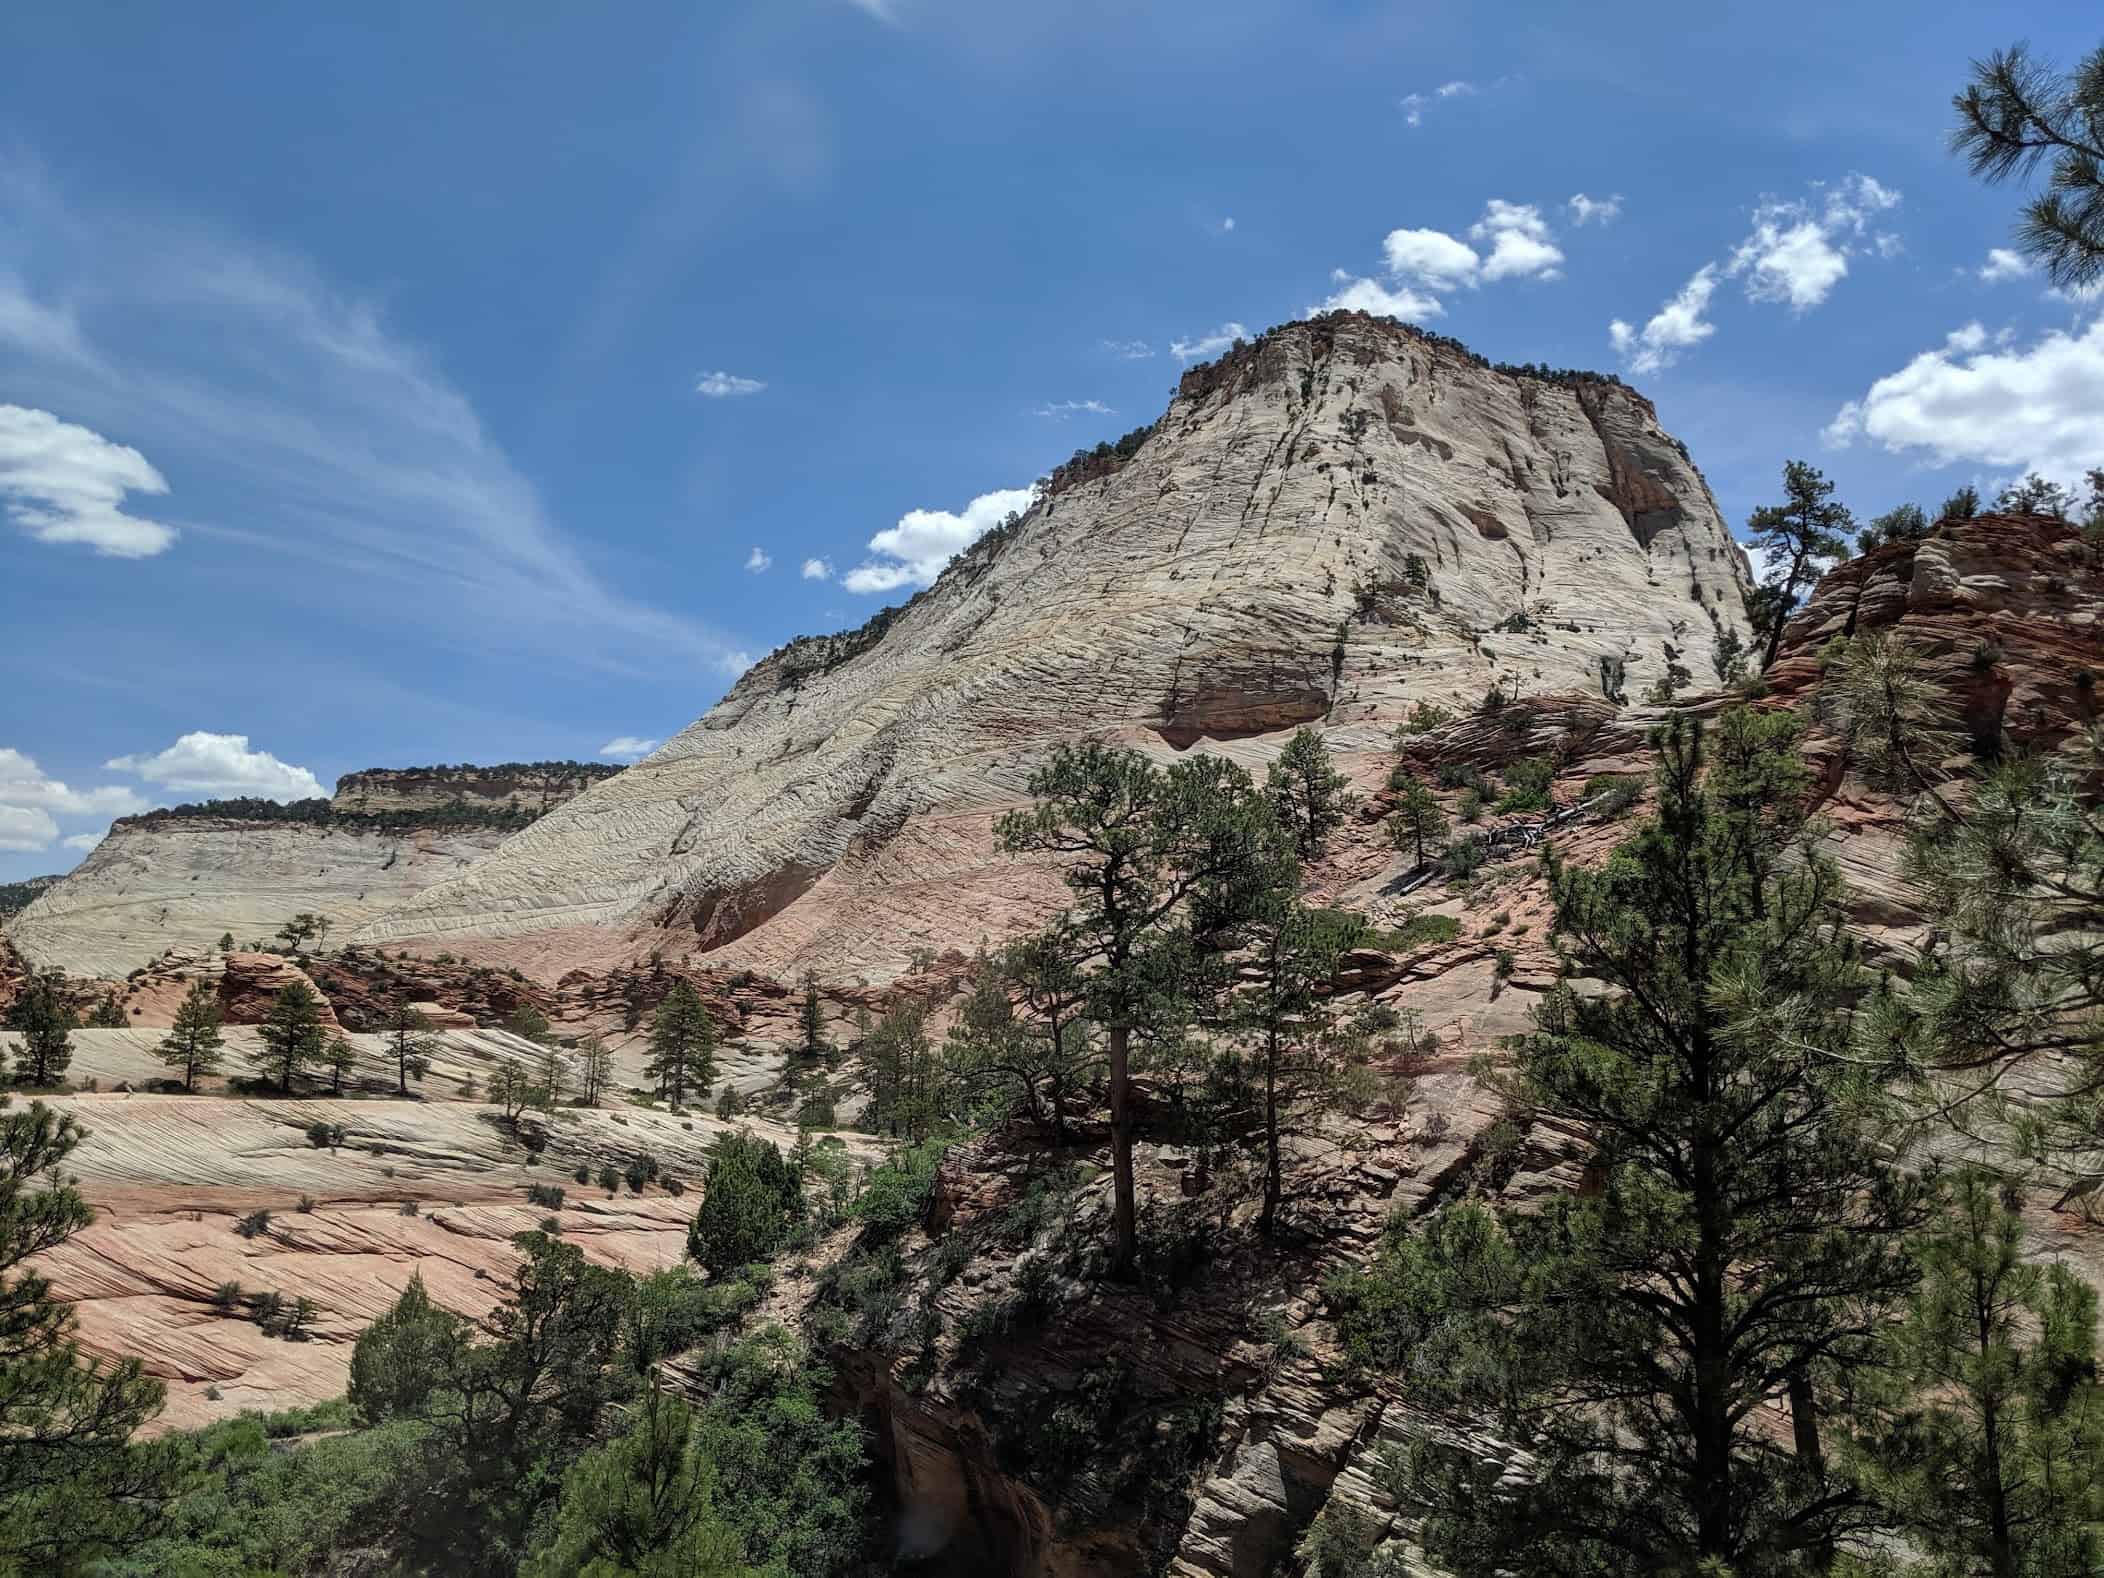 An Afternoon in Underrated East Zion National Park